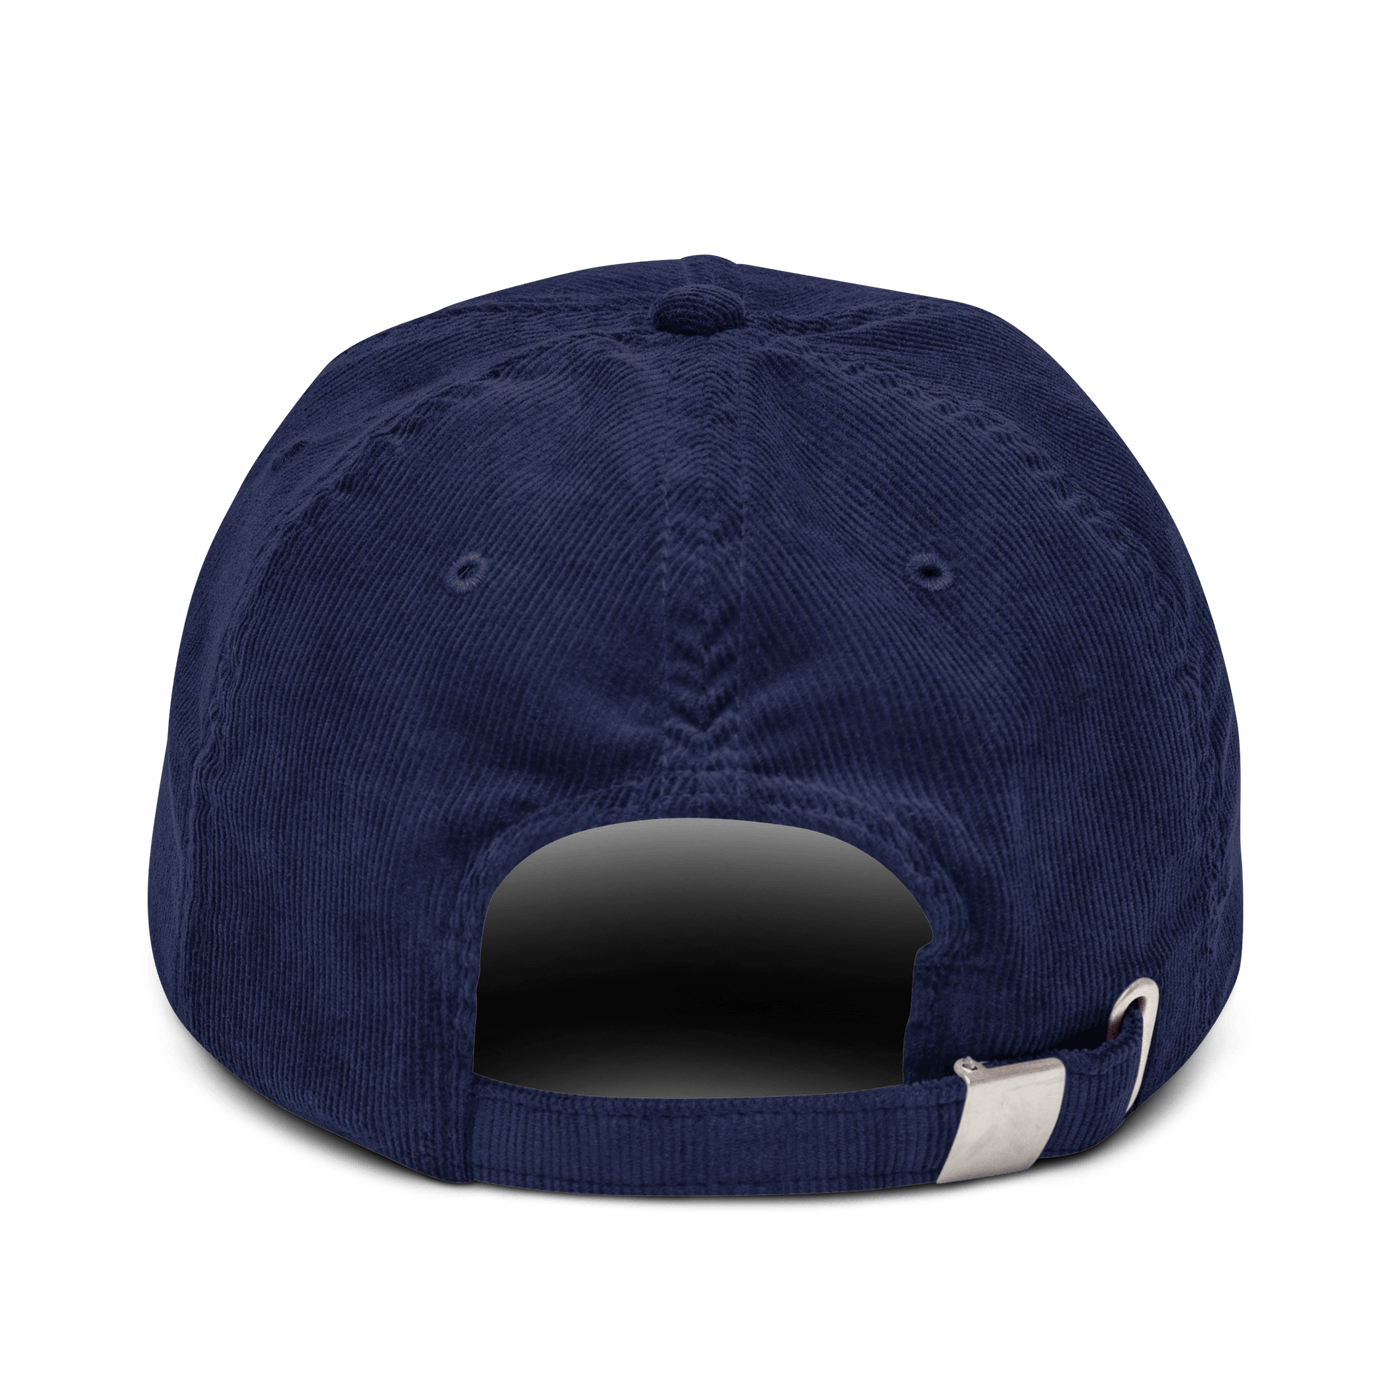 I don't work here Corduroy hat - Oxford Navy - - Just Another Cap Store